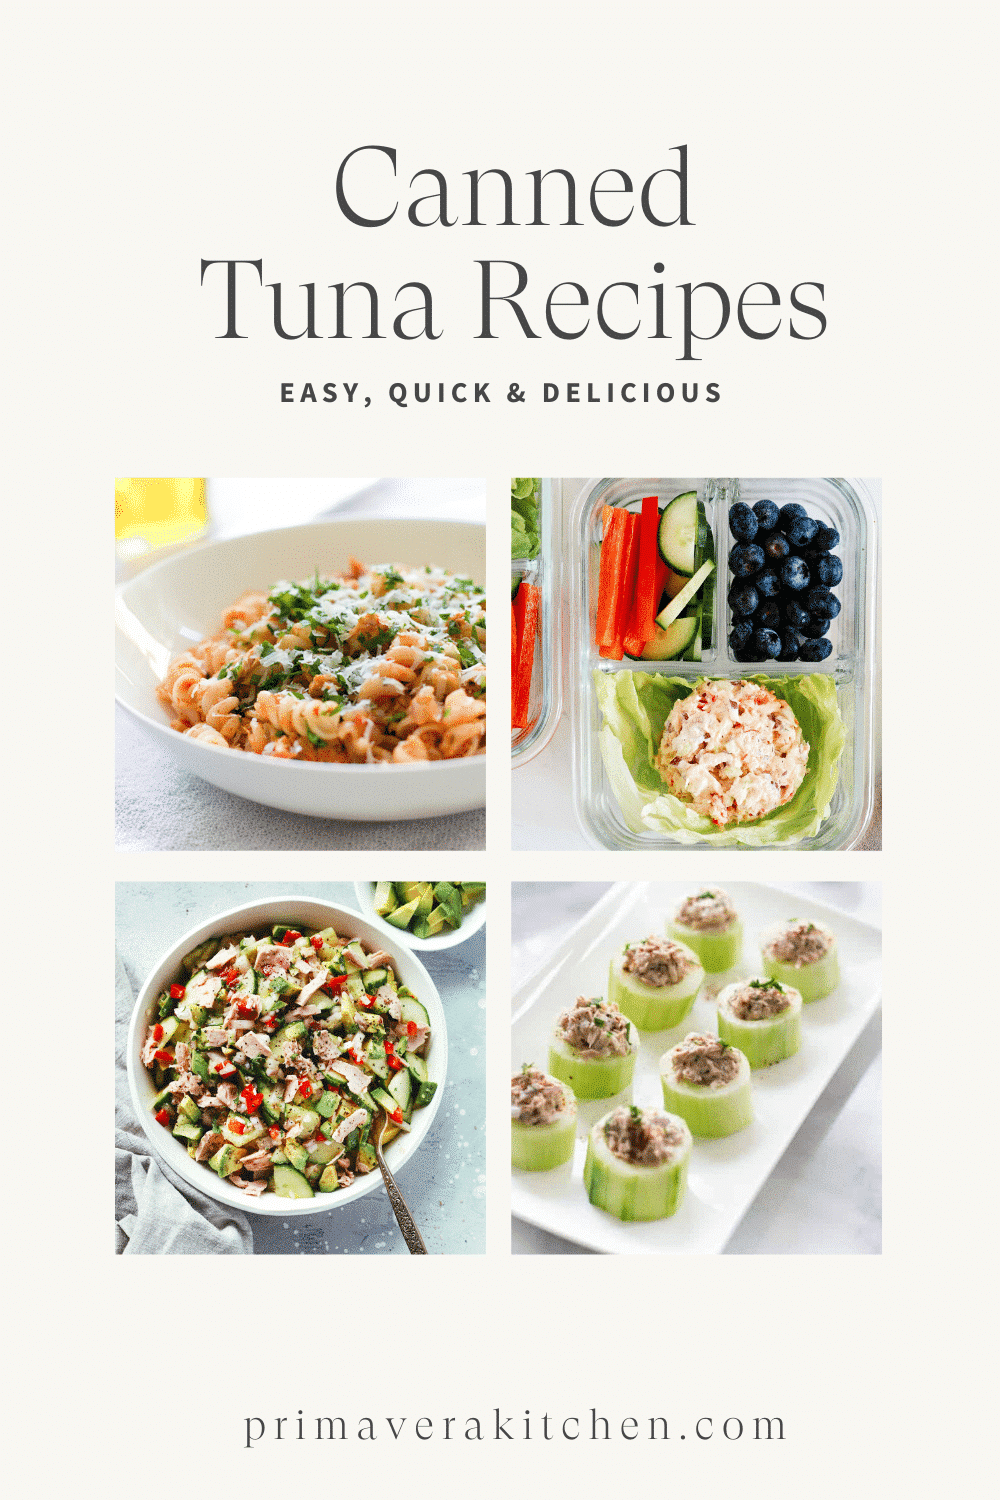 Titled Photo Collage (and shown): Canned Tuna Recipes